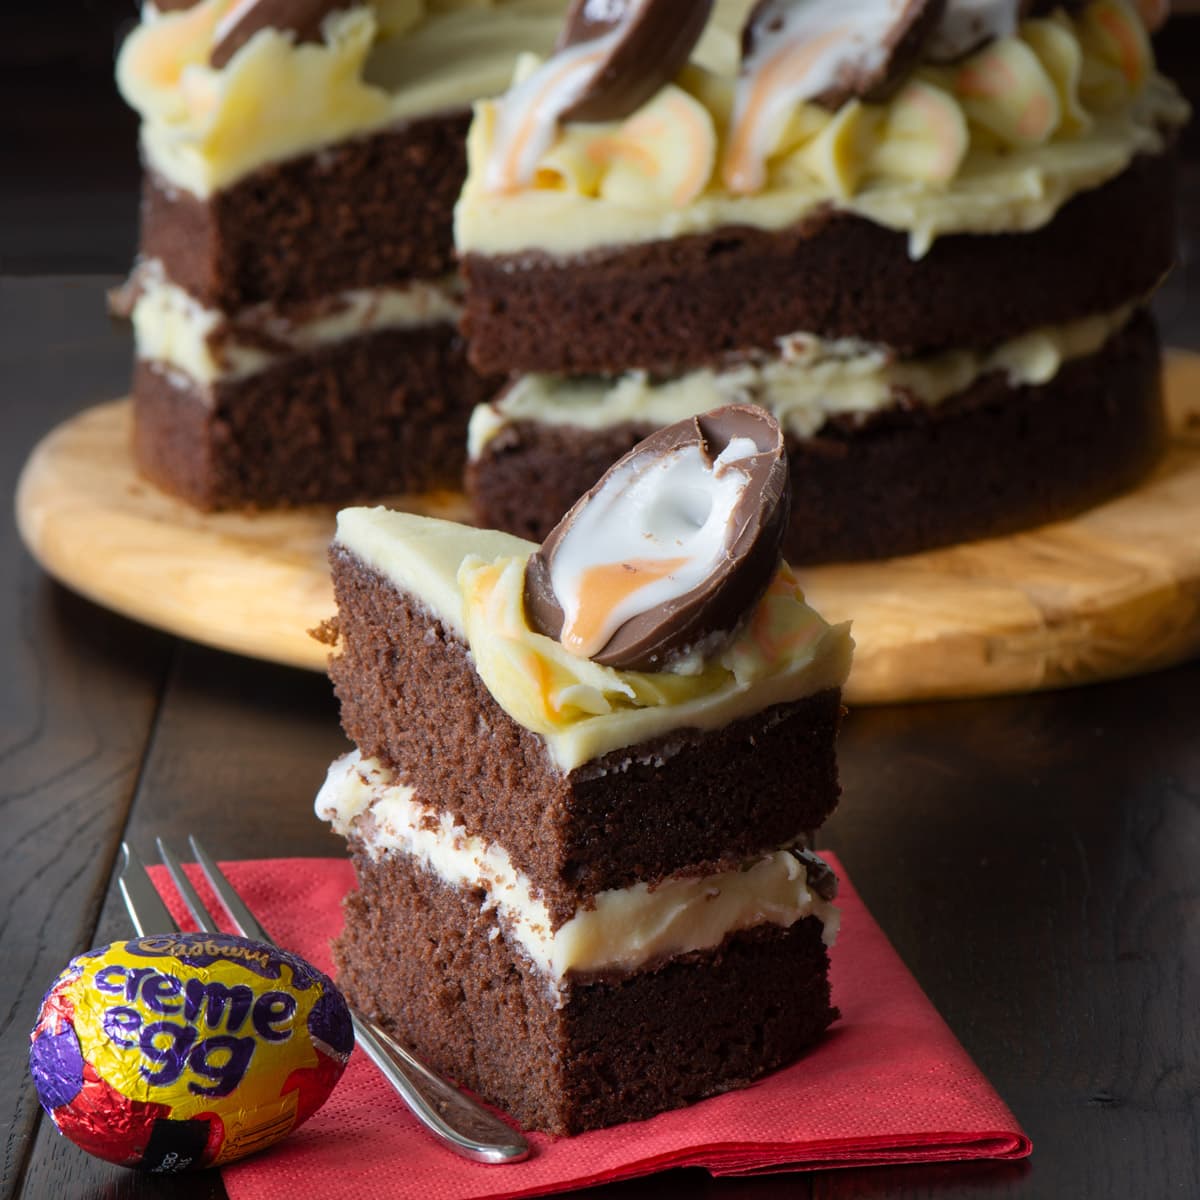 A slice of Creme Egg cake with the remaining cake in the background. A chocolate cake, with white chocolate buttercream, topped with Creme Egg halves.